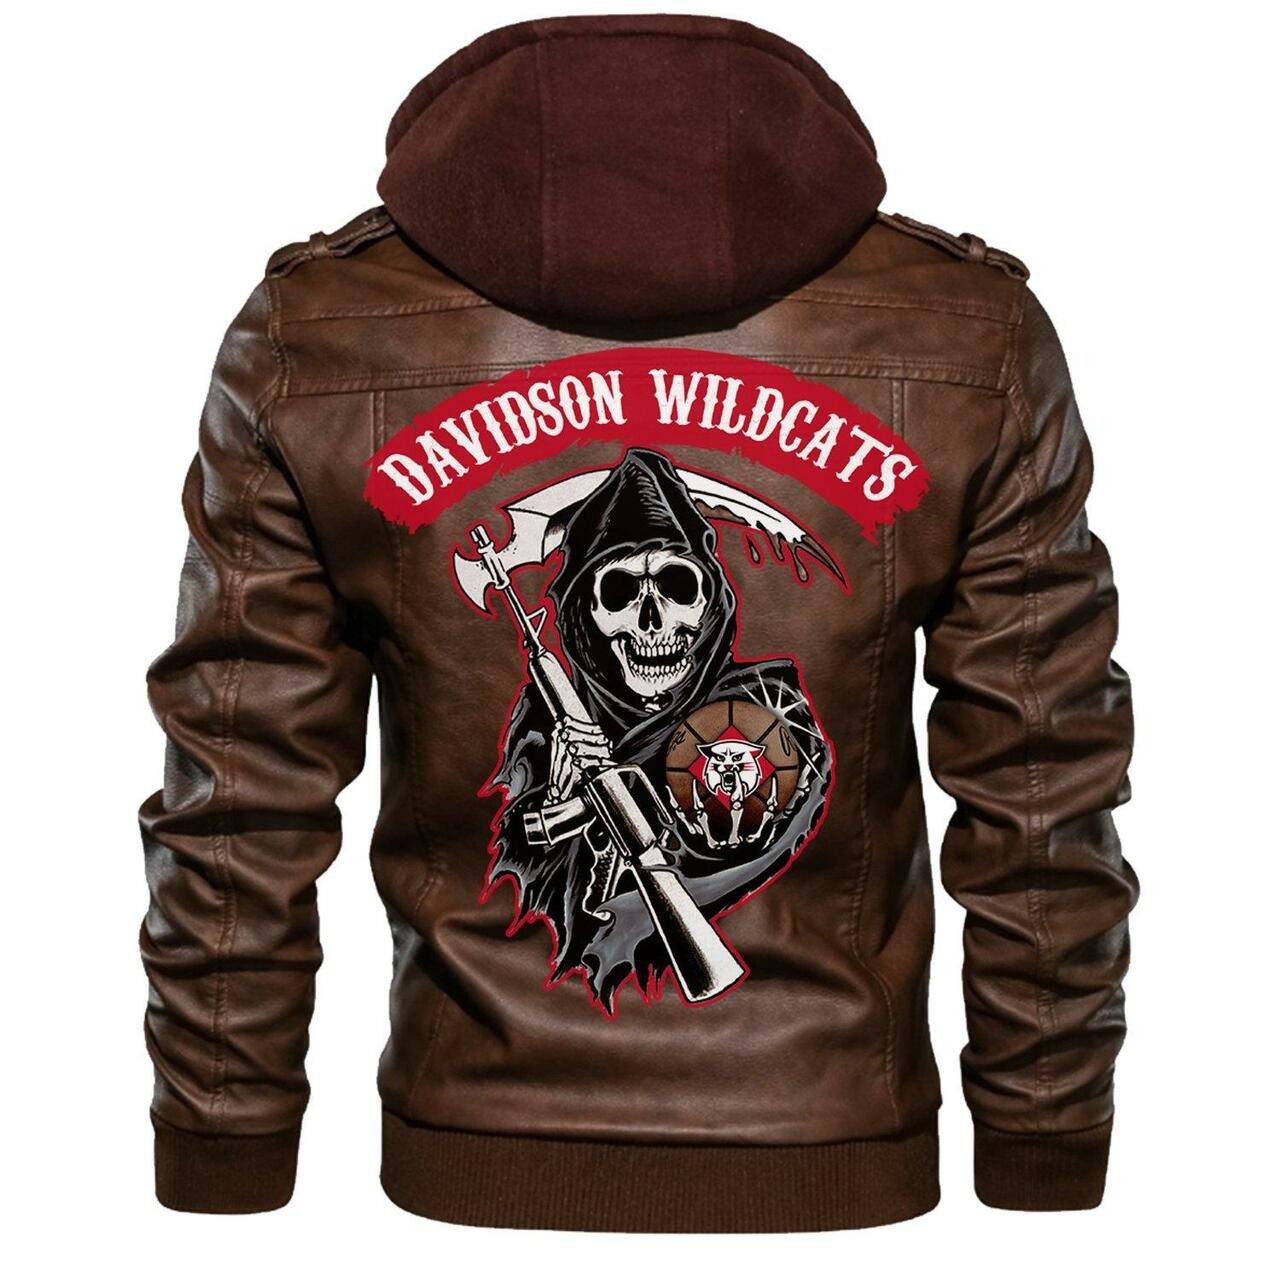 Check out and find the right leather jacket below 73